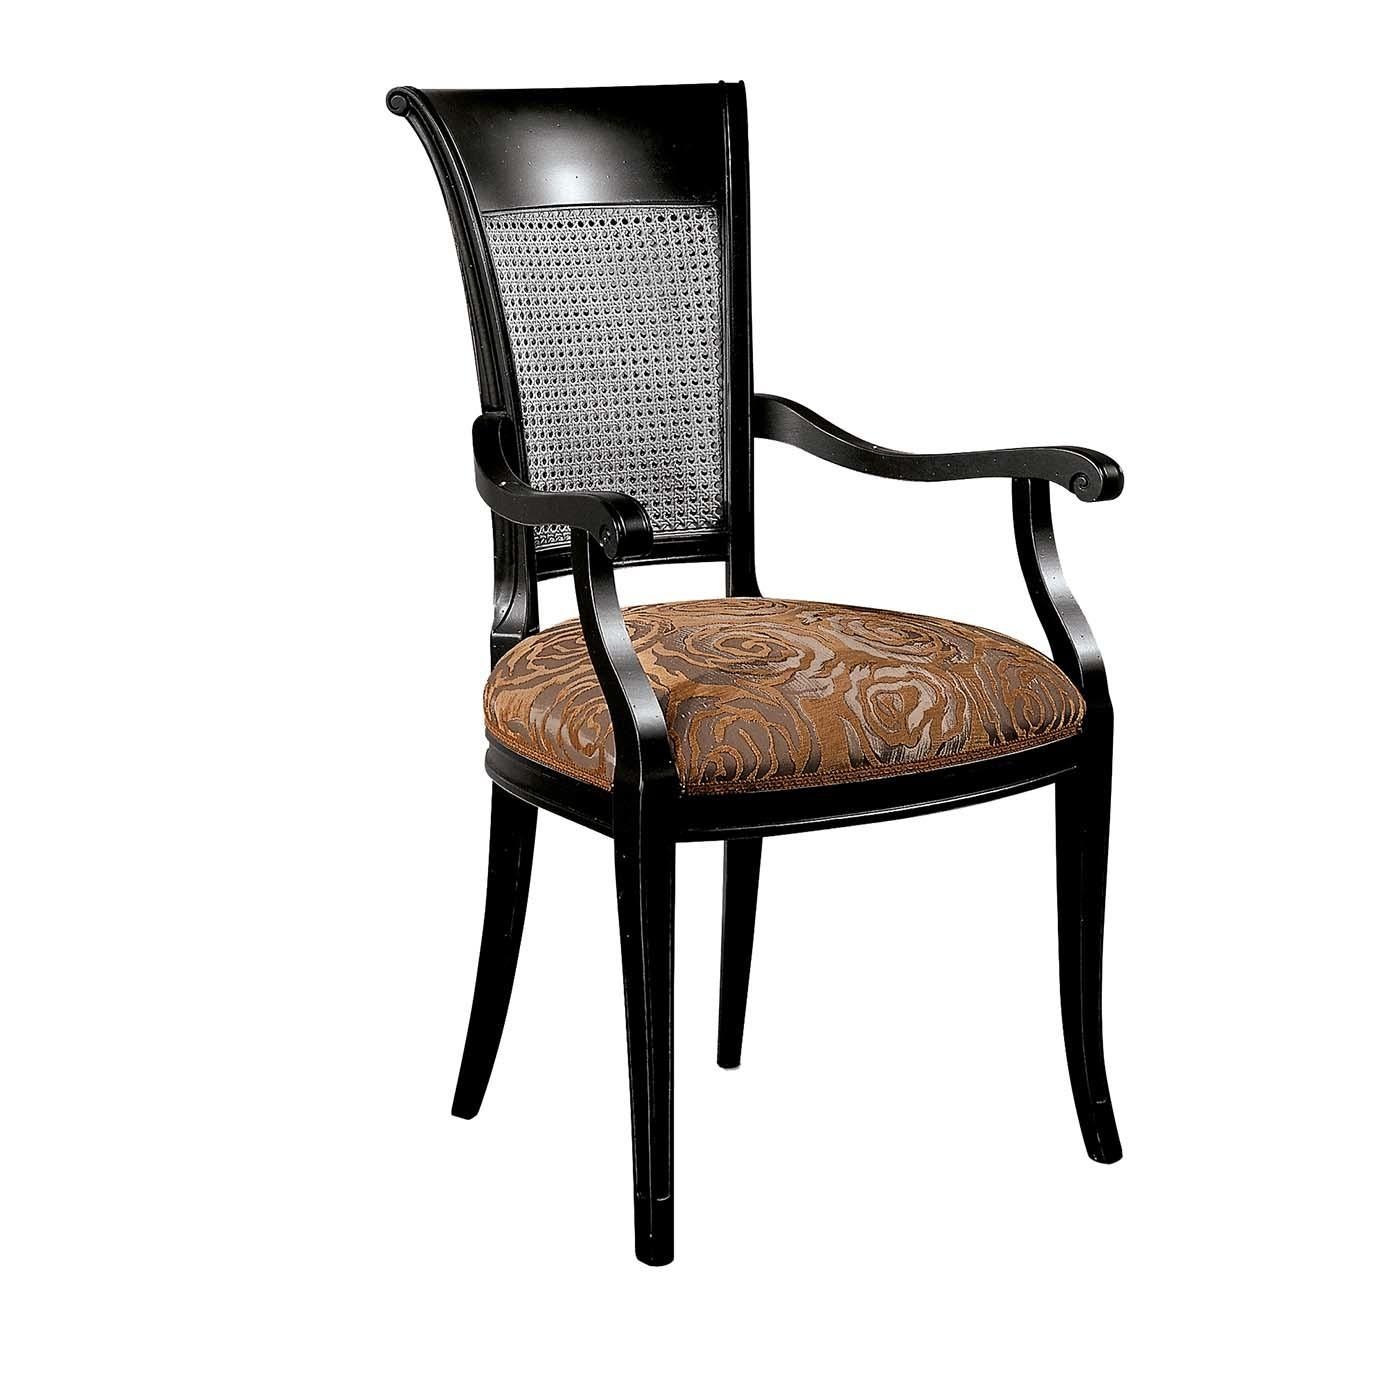 This unique chair with armrests is part of the Contemporary collection and, true to its name, combines a series of modern elements in a traditional frame, creating a bold and refined accent piece to display anywhere in the house. The classic solid